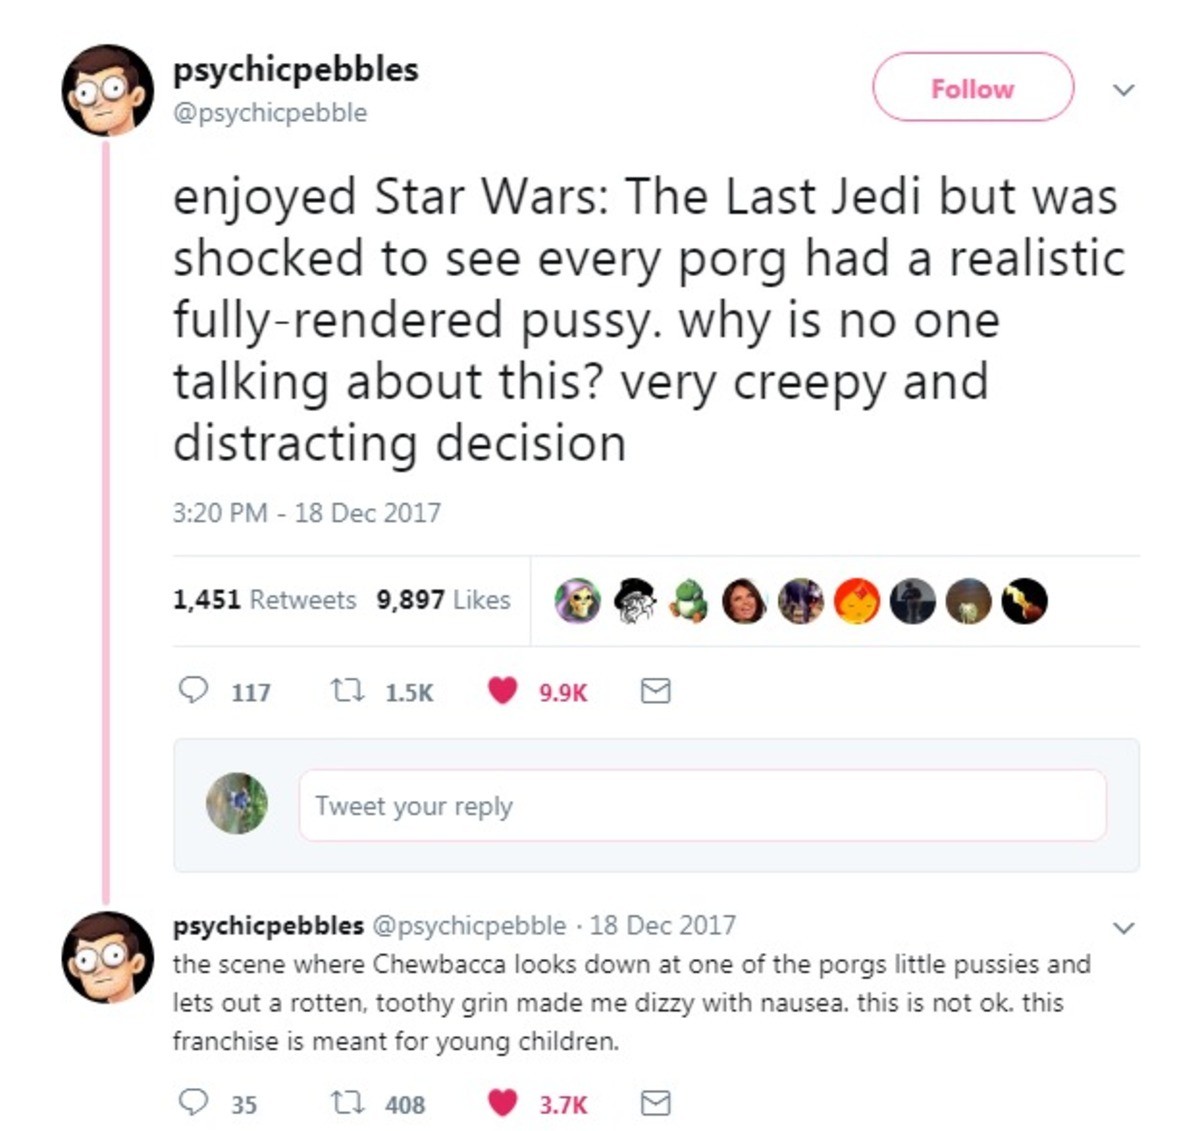 Tyerseximy Pediact Wenokno. . lall) psychicpebbles /" Follow as enjoyed Star Wars: The Last Jedi but was shocked to see every perg had a realistic pussy. why is